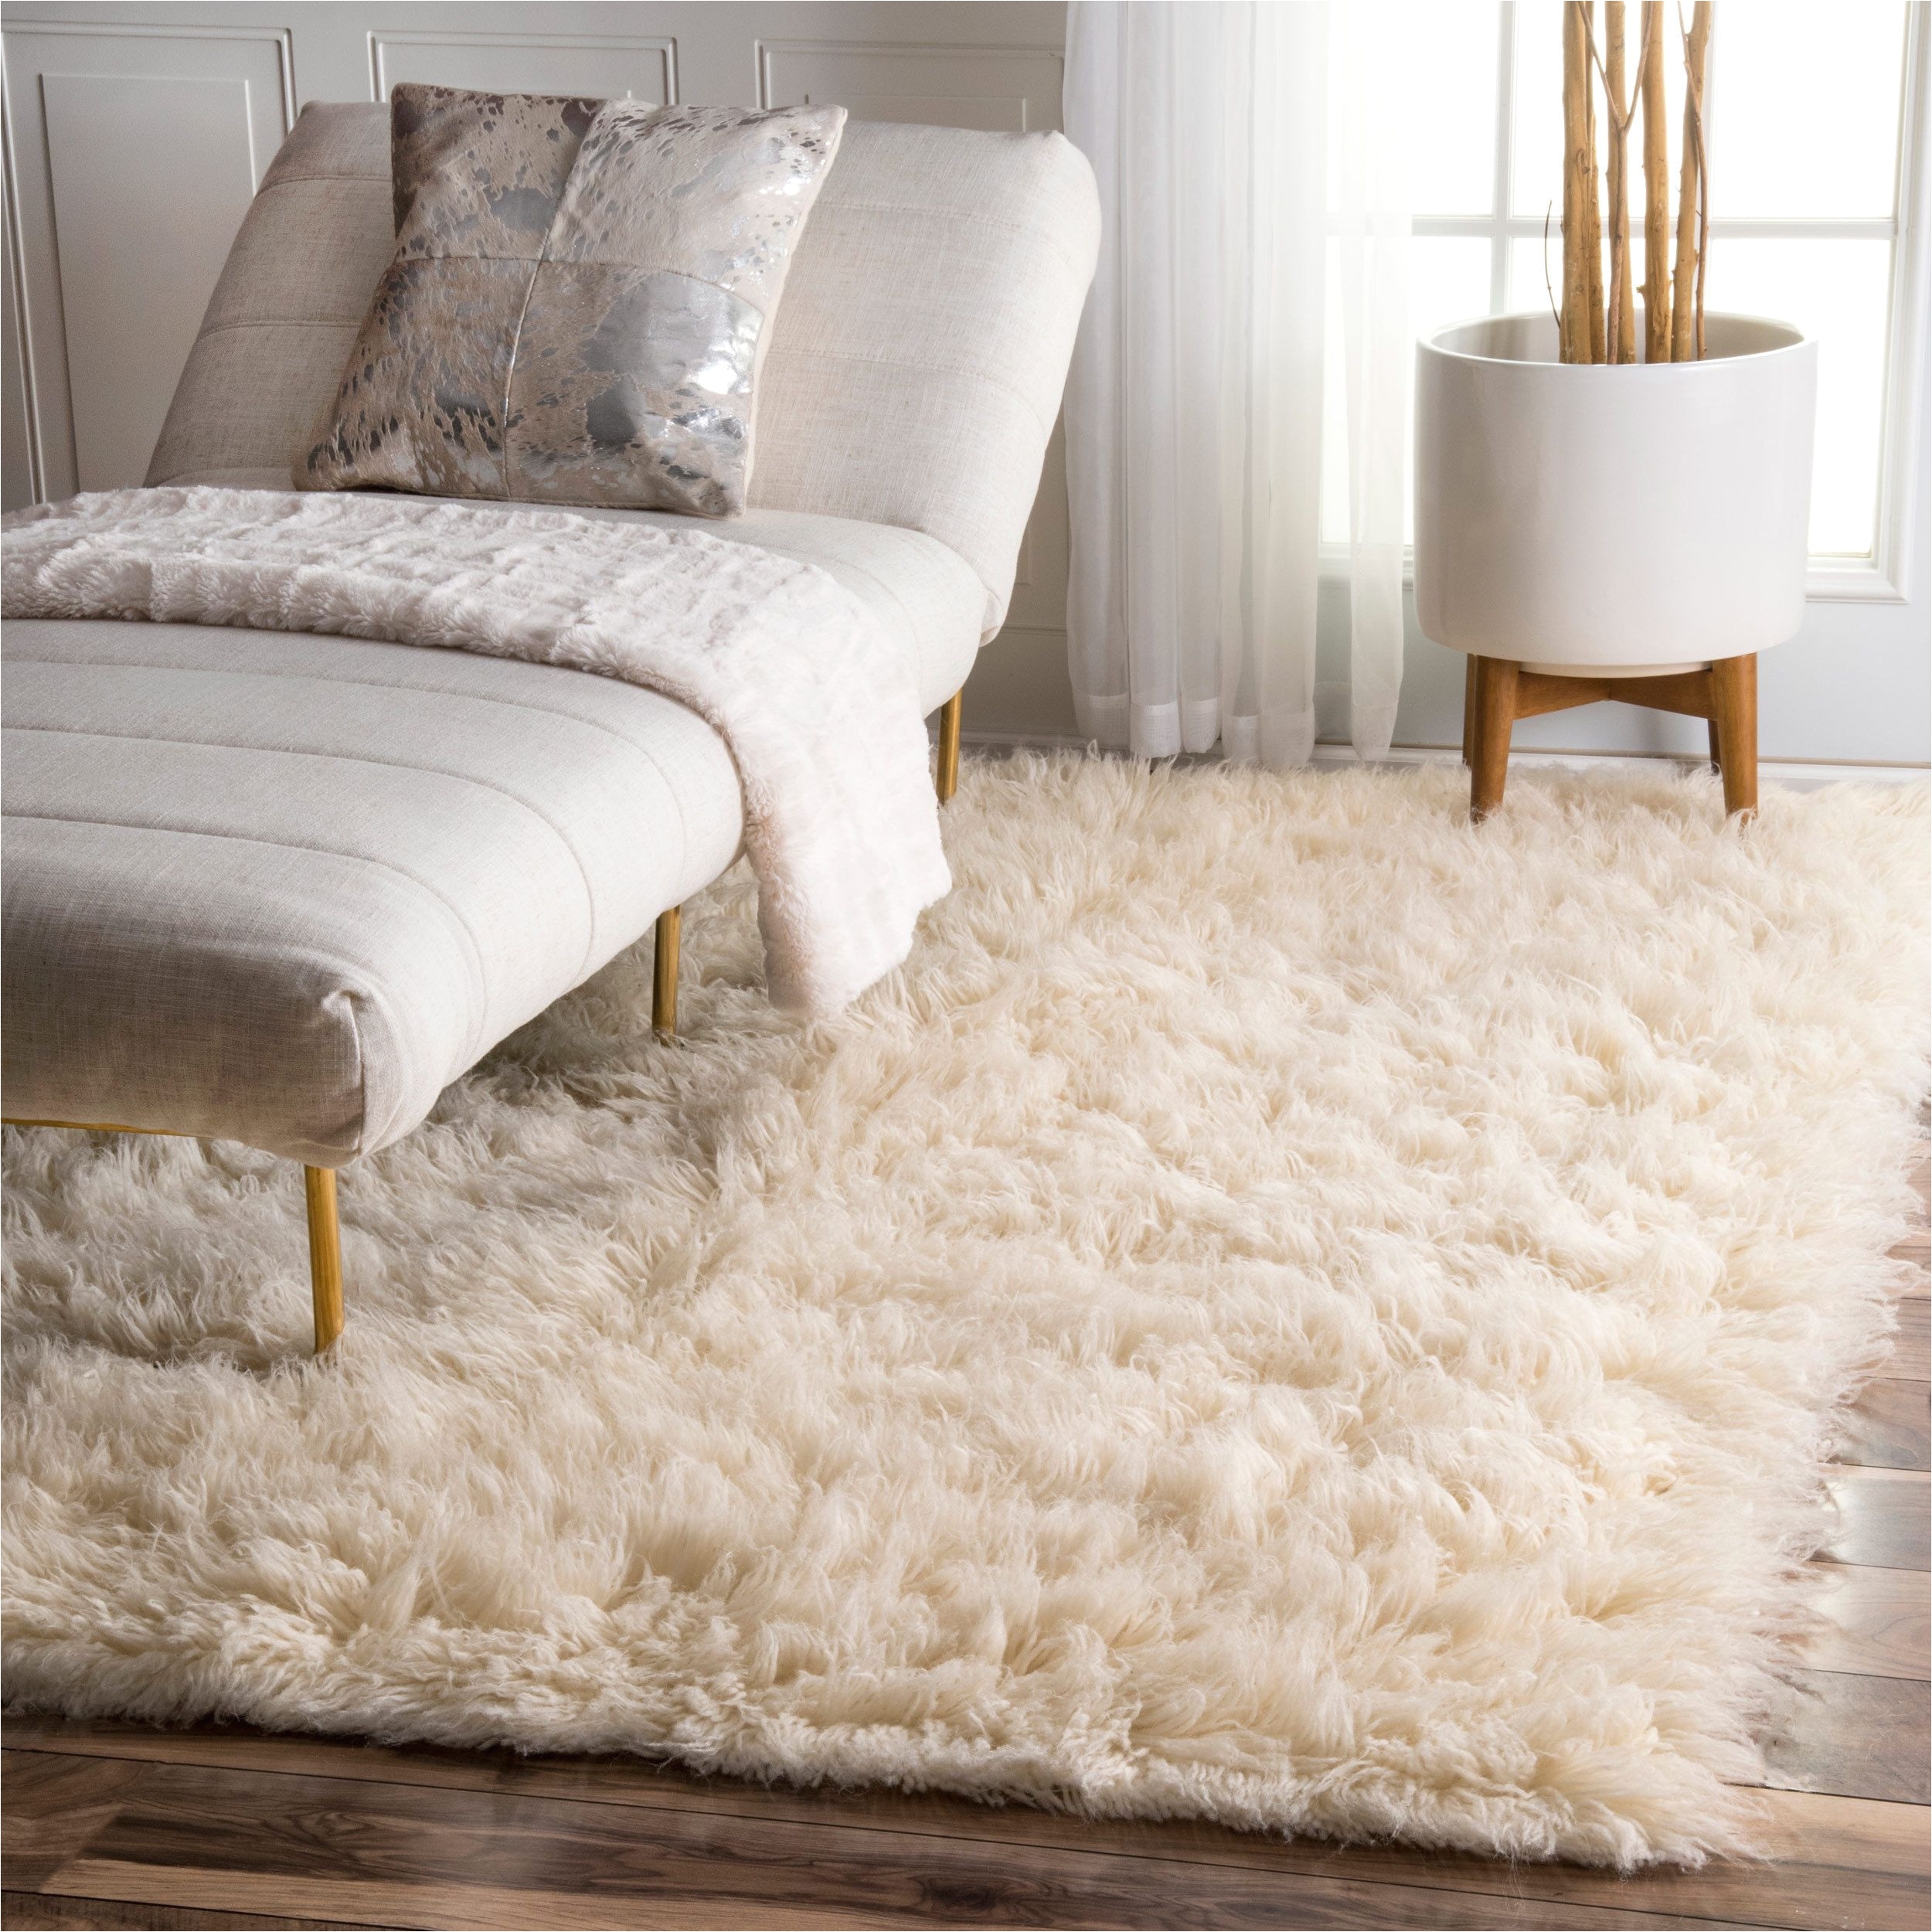 8a 10 sheepskin rug lovely add a touch of modern design with this new zealand